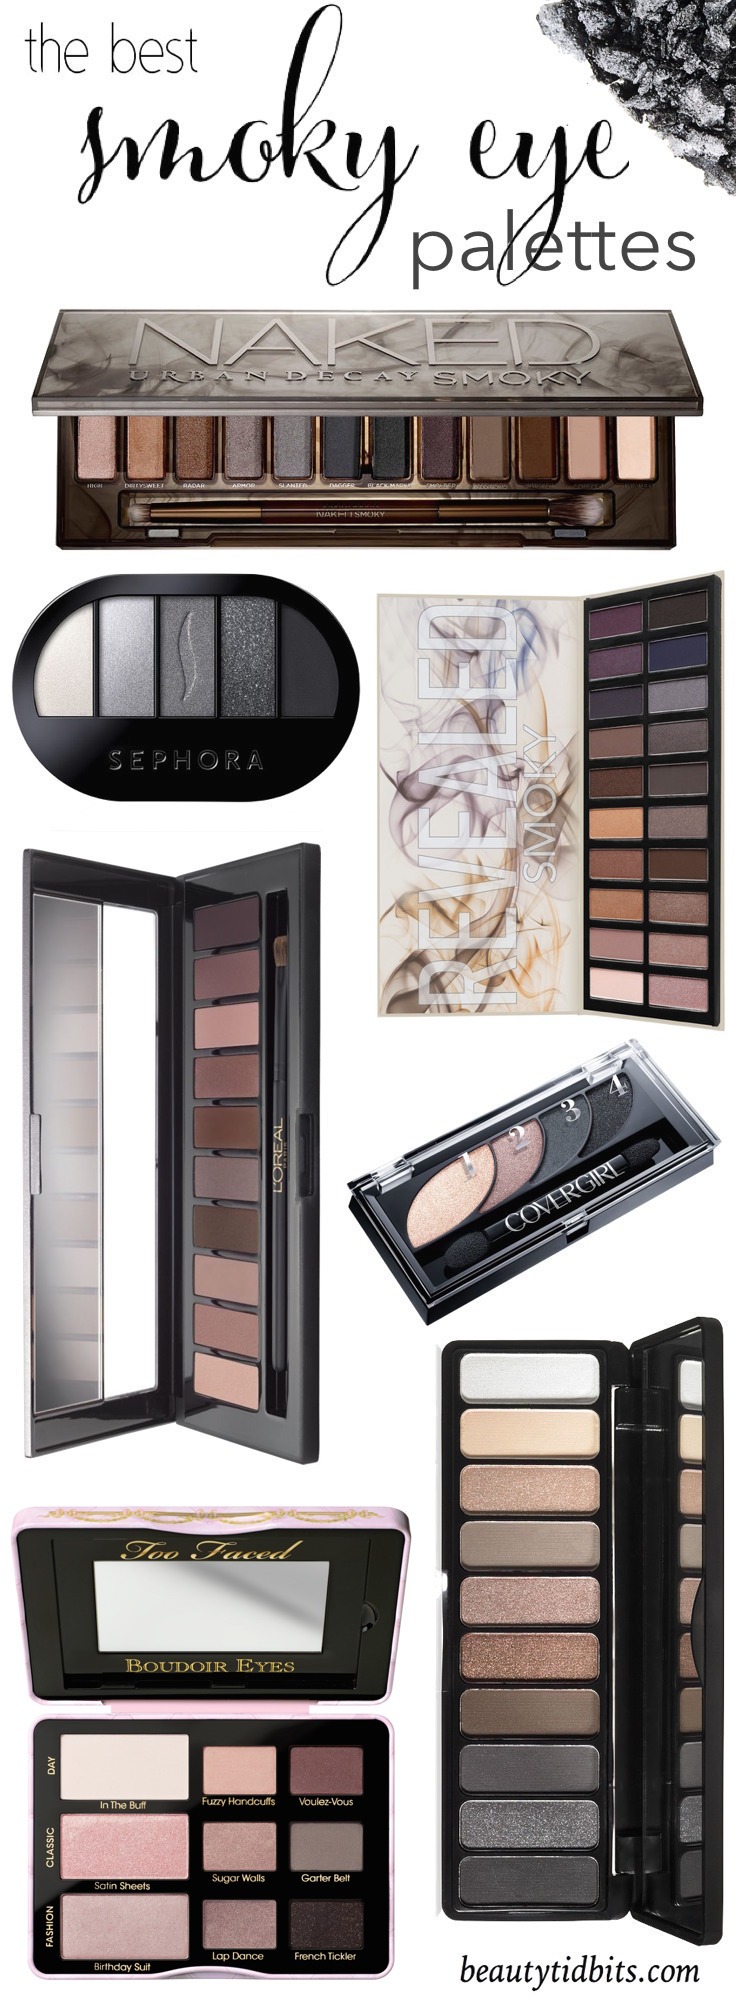 The best smoky eyeshadow palettes, from drugstore to high-end, that will help you create the perfect smoky eye with ease!